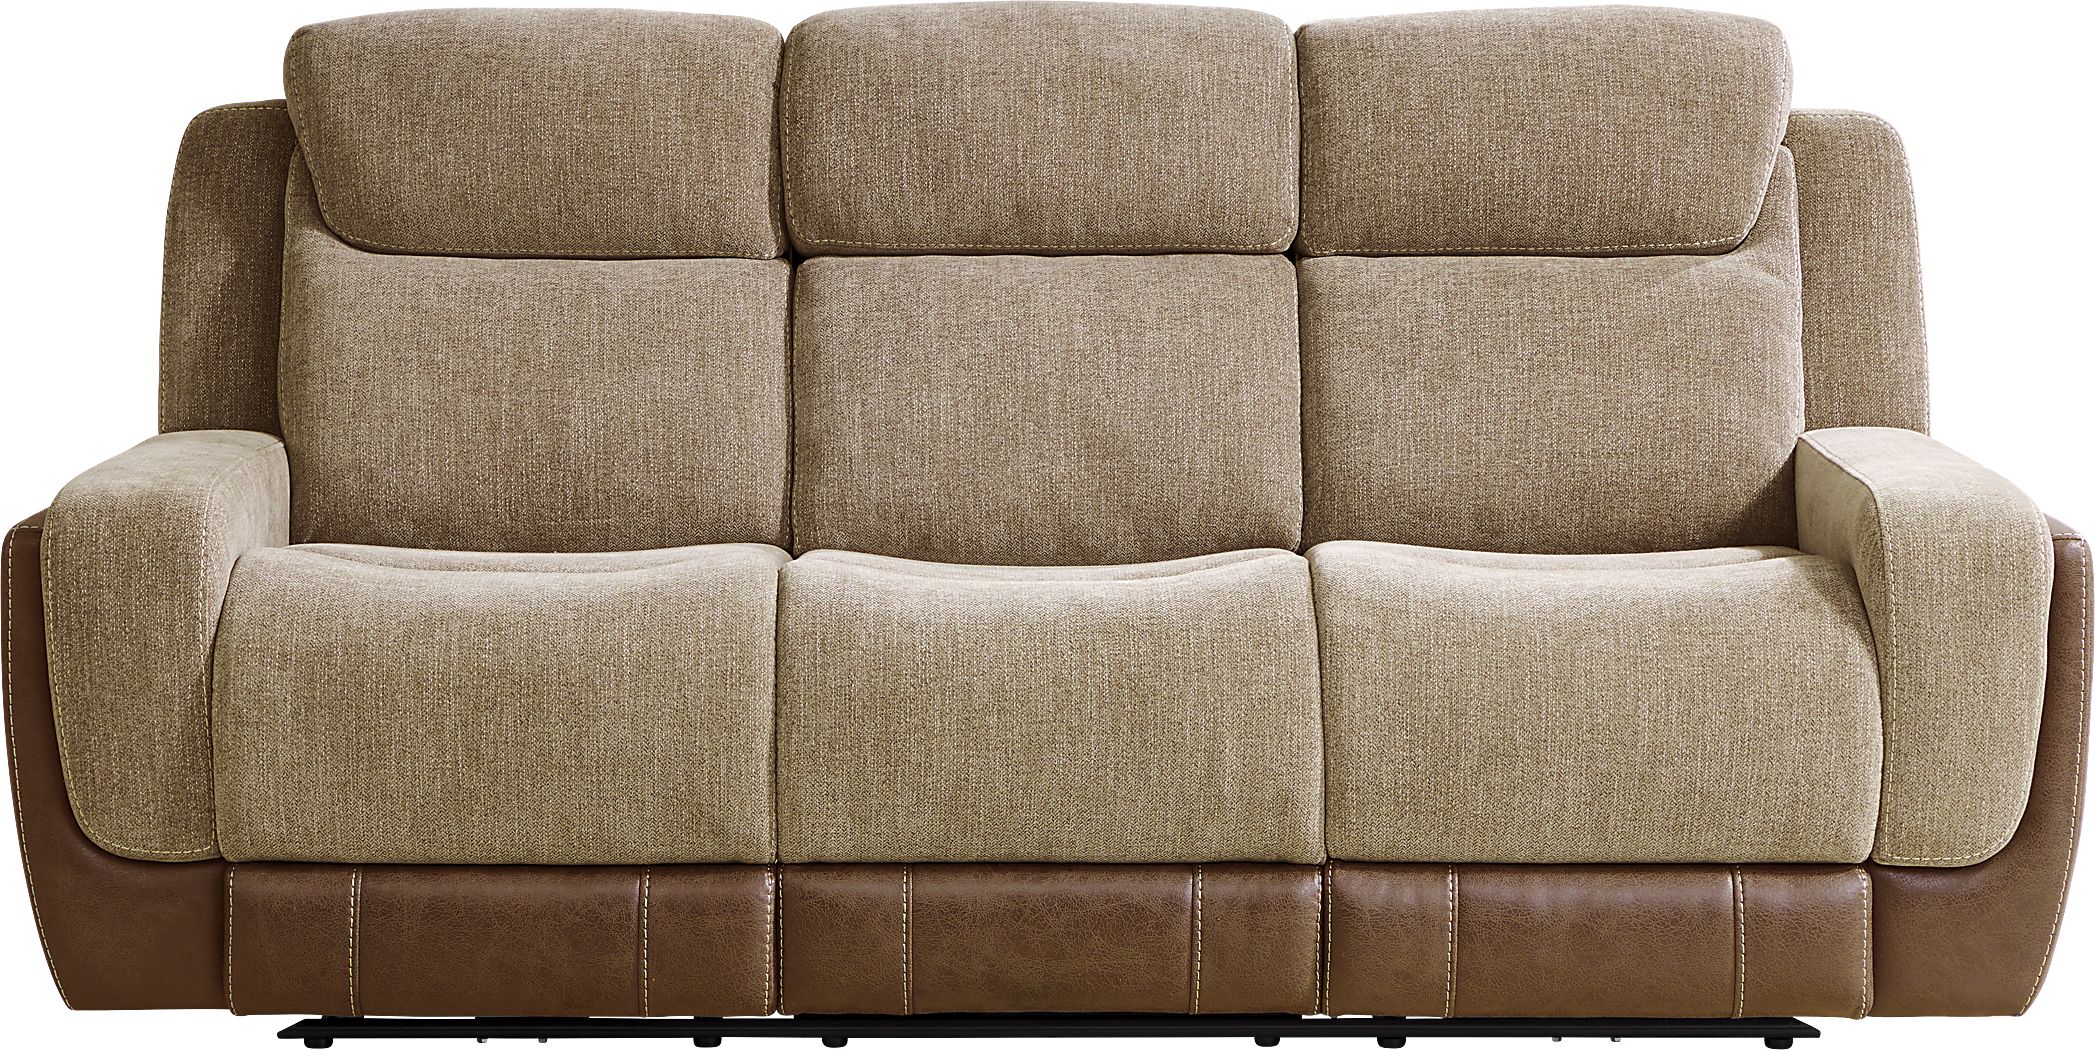 State Street Camel 7 Pc Living Room with Reclining Sofa